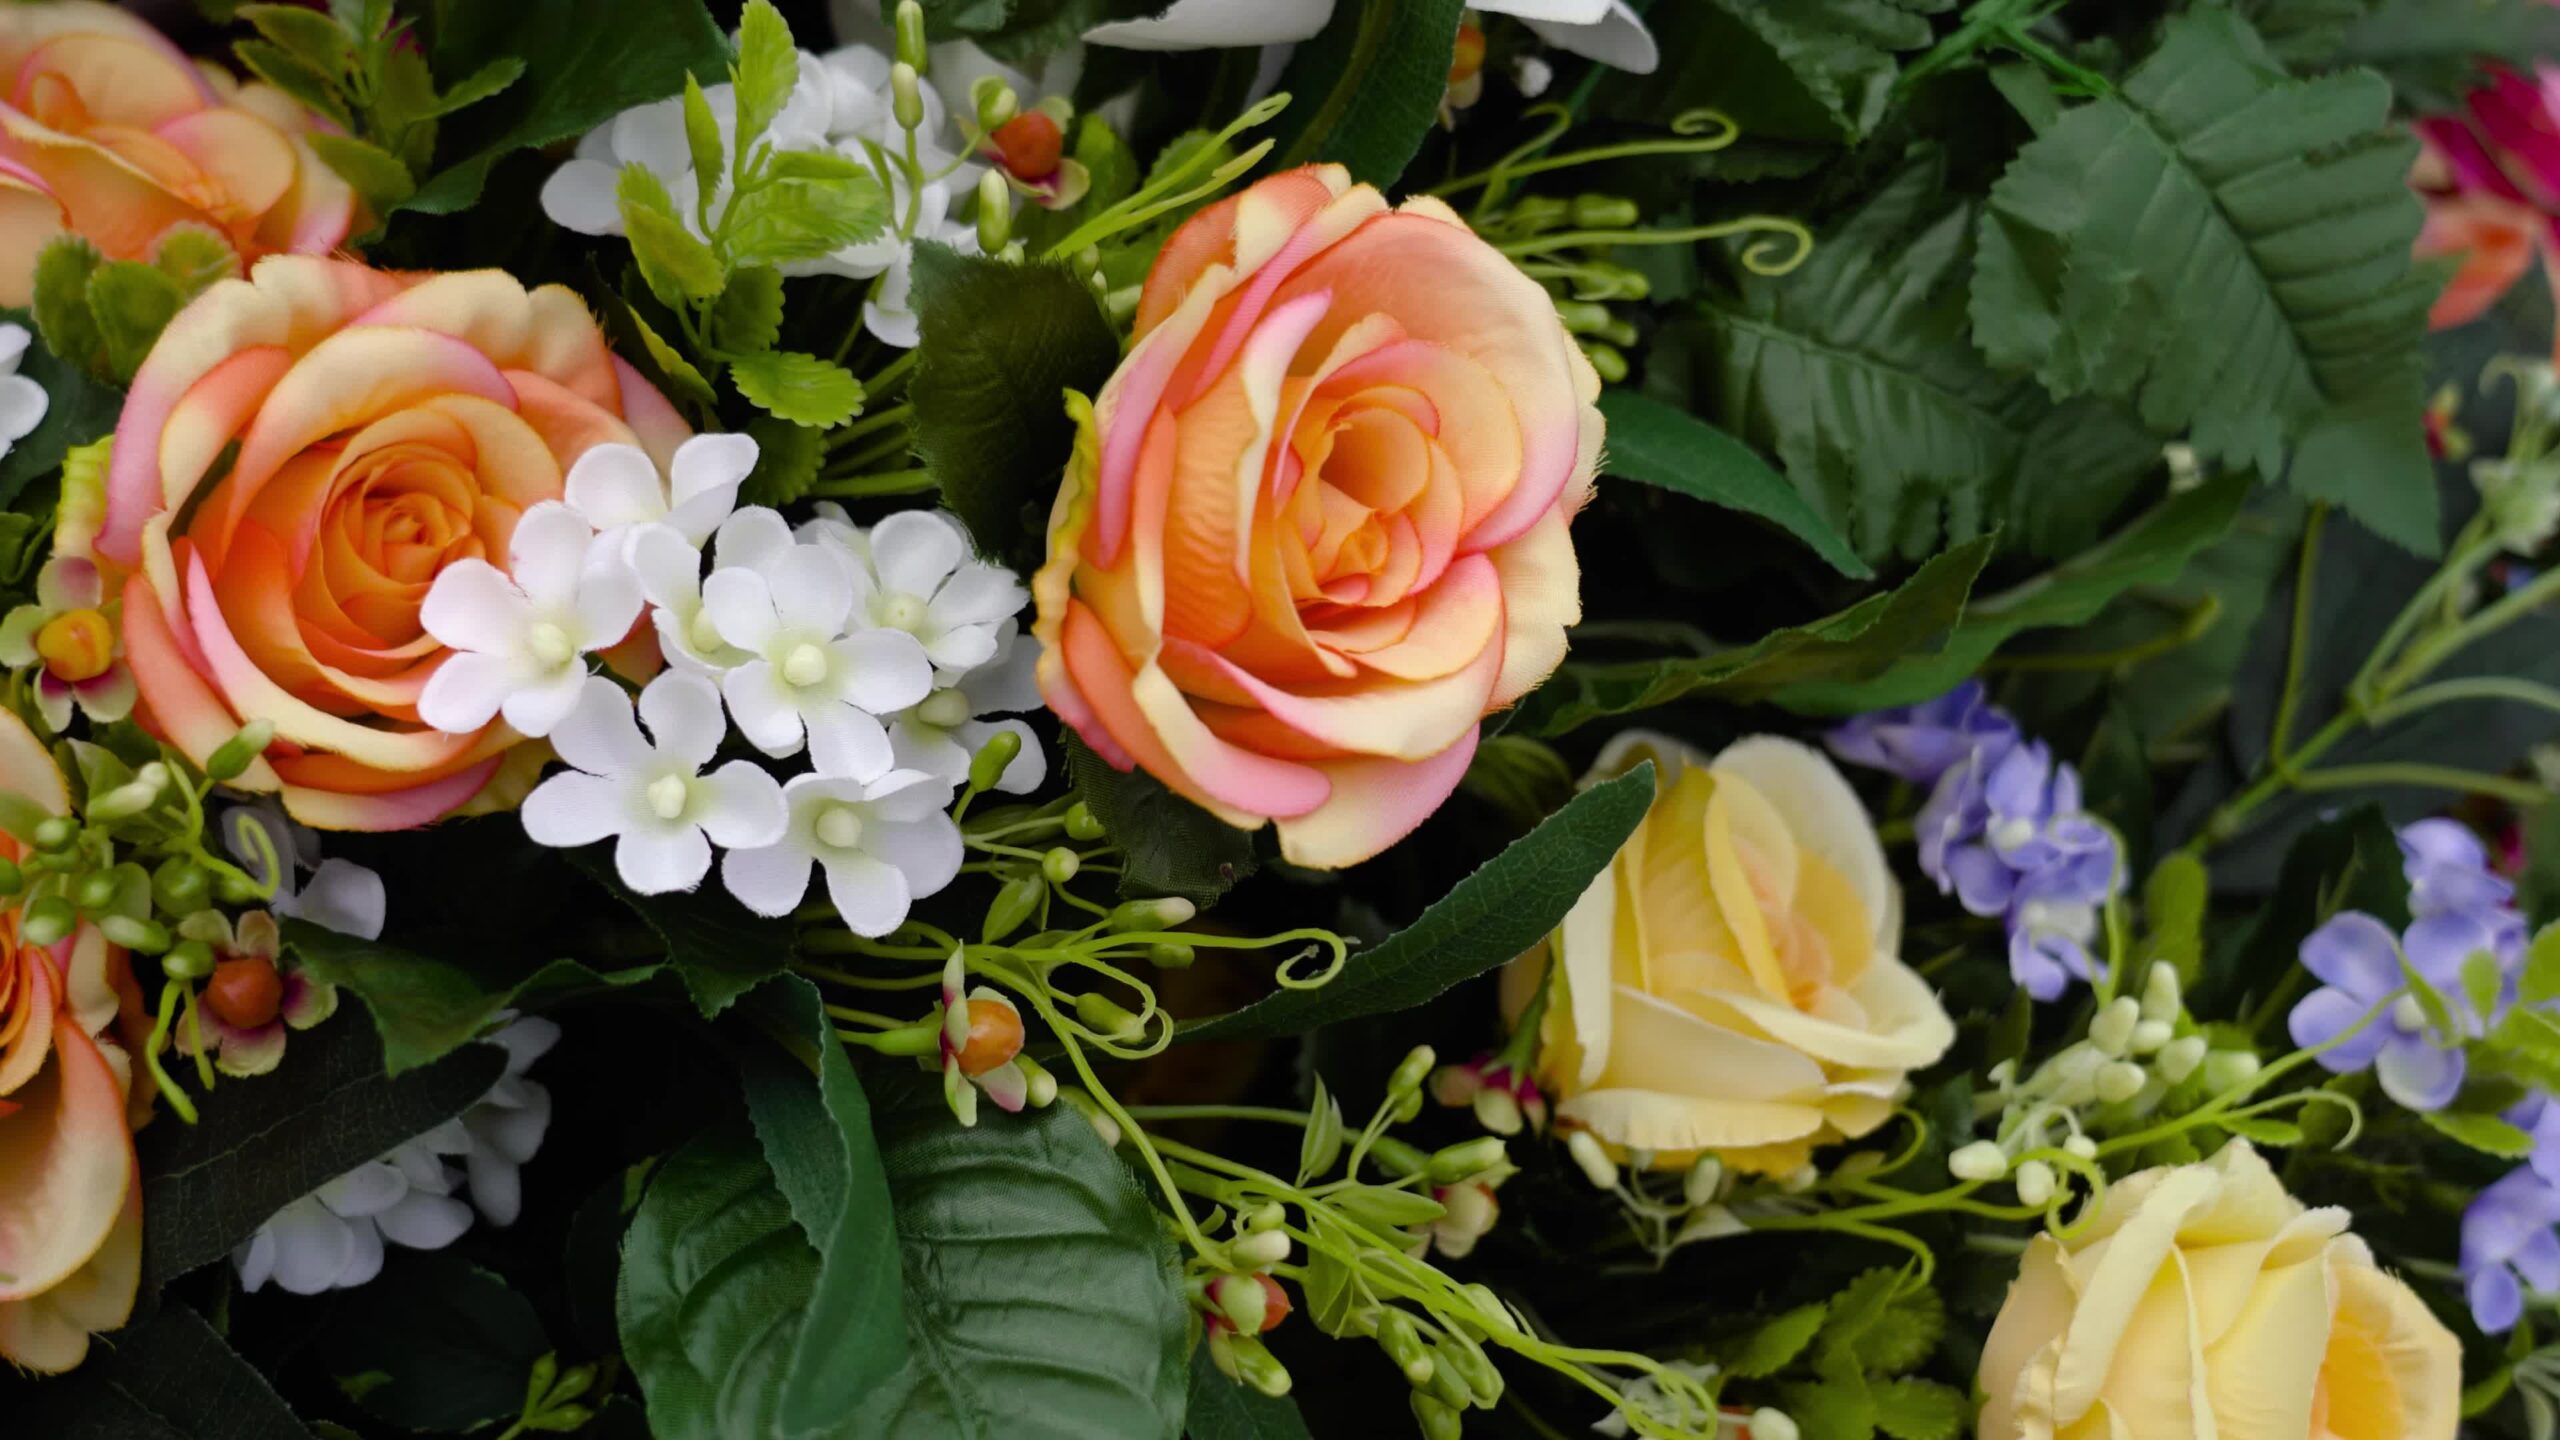 Hybrid tea roses among flowers in local florist marketplace